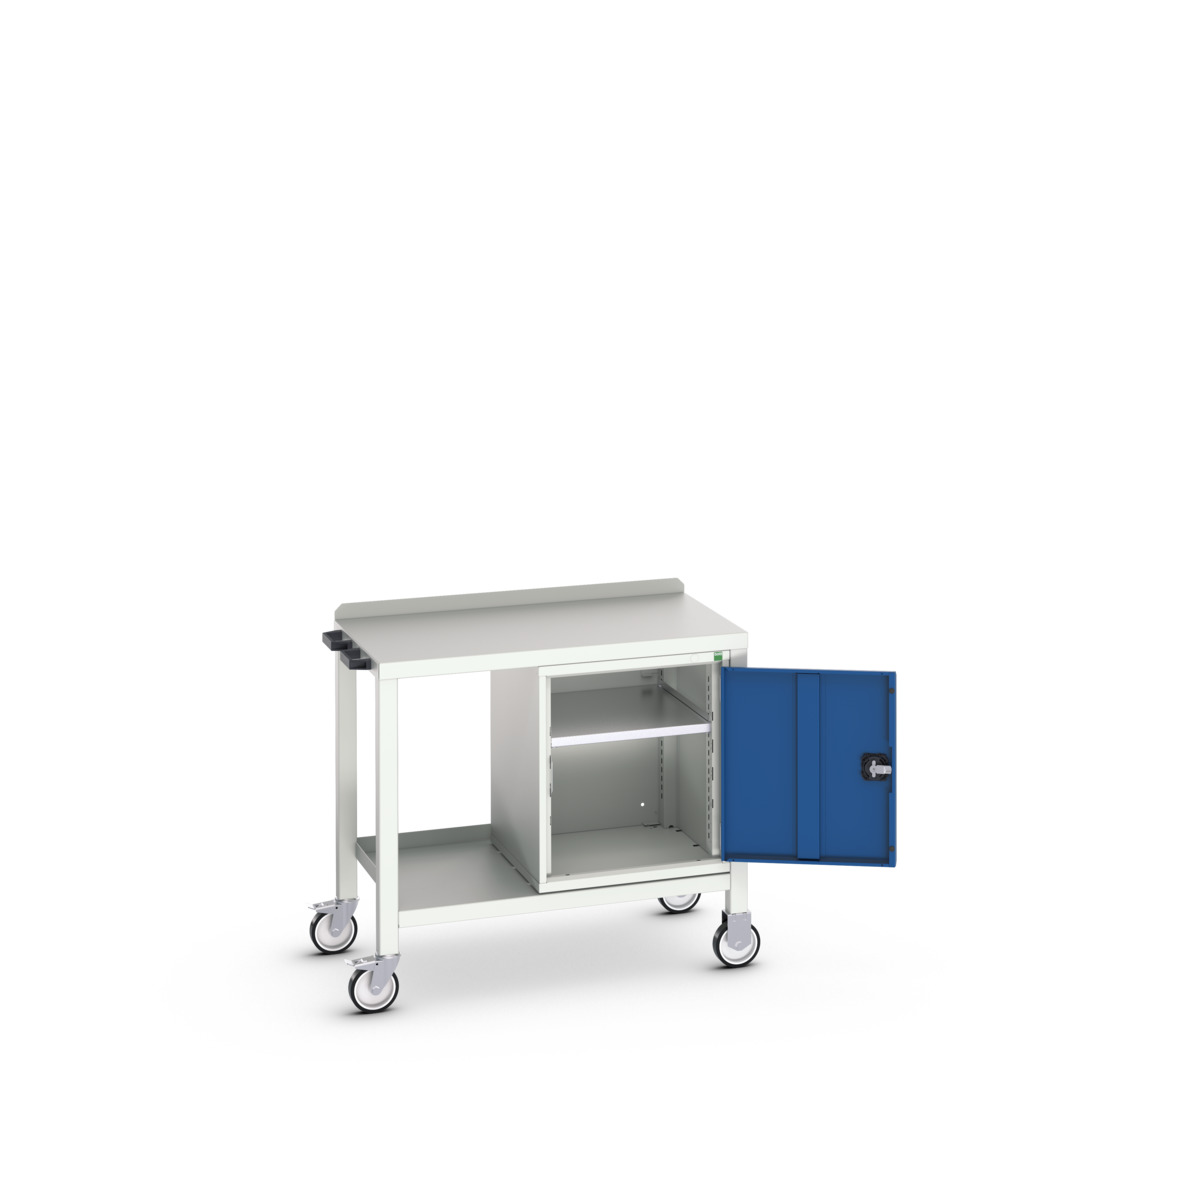 16922802.11 - verso mobile welded bench